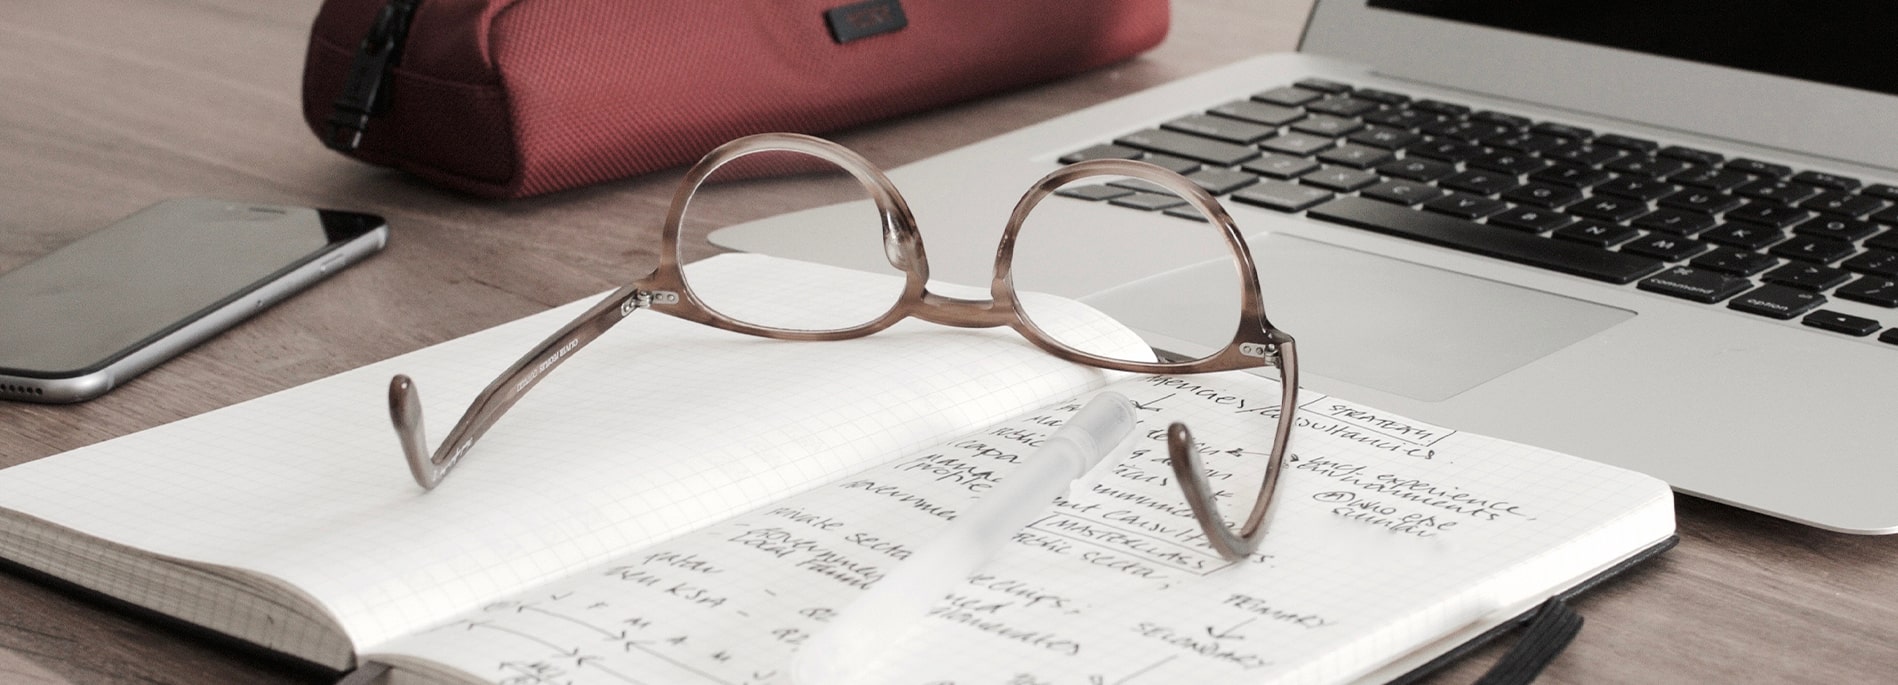 Pair of glasses upside down on top of an opened notepad